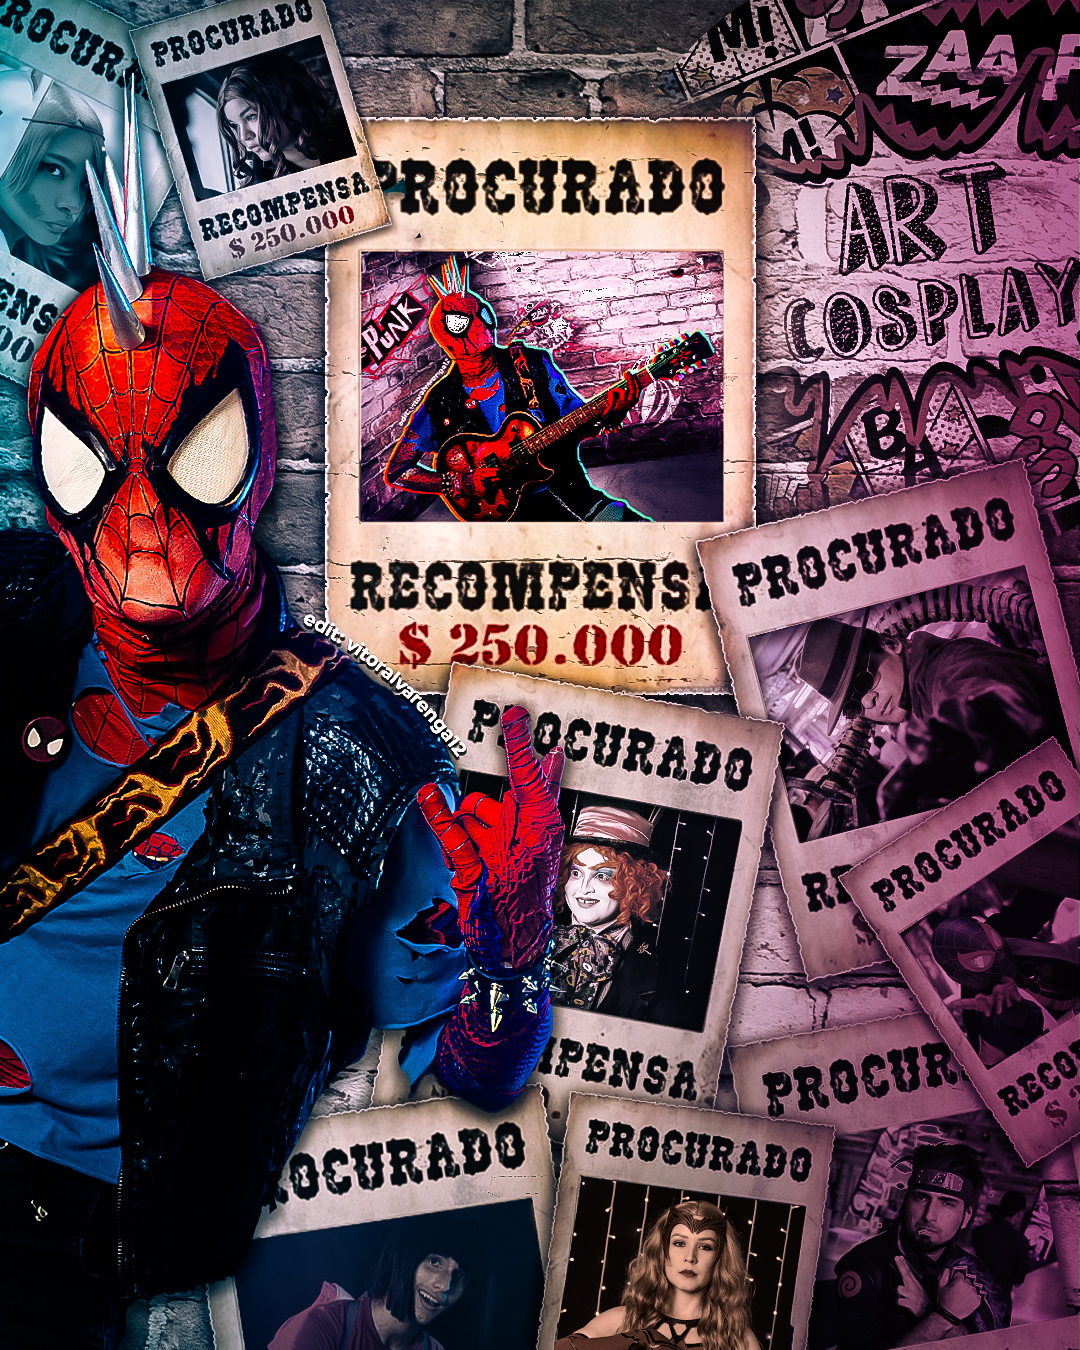 Spider-Punk being wanted